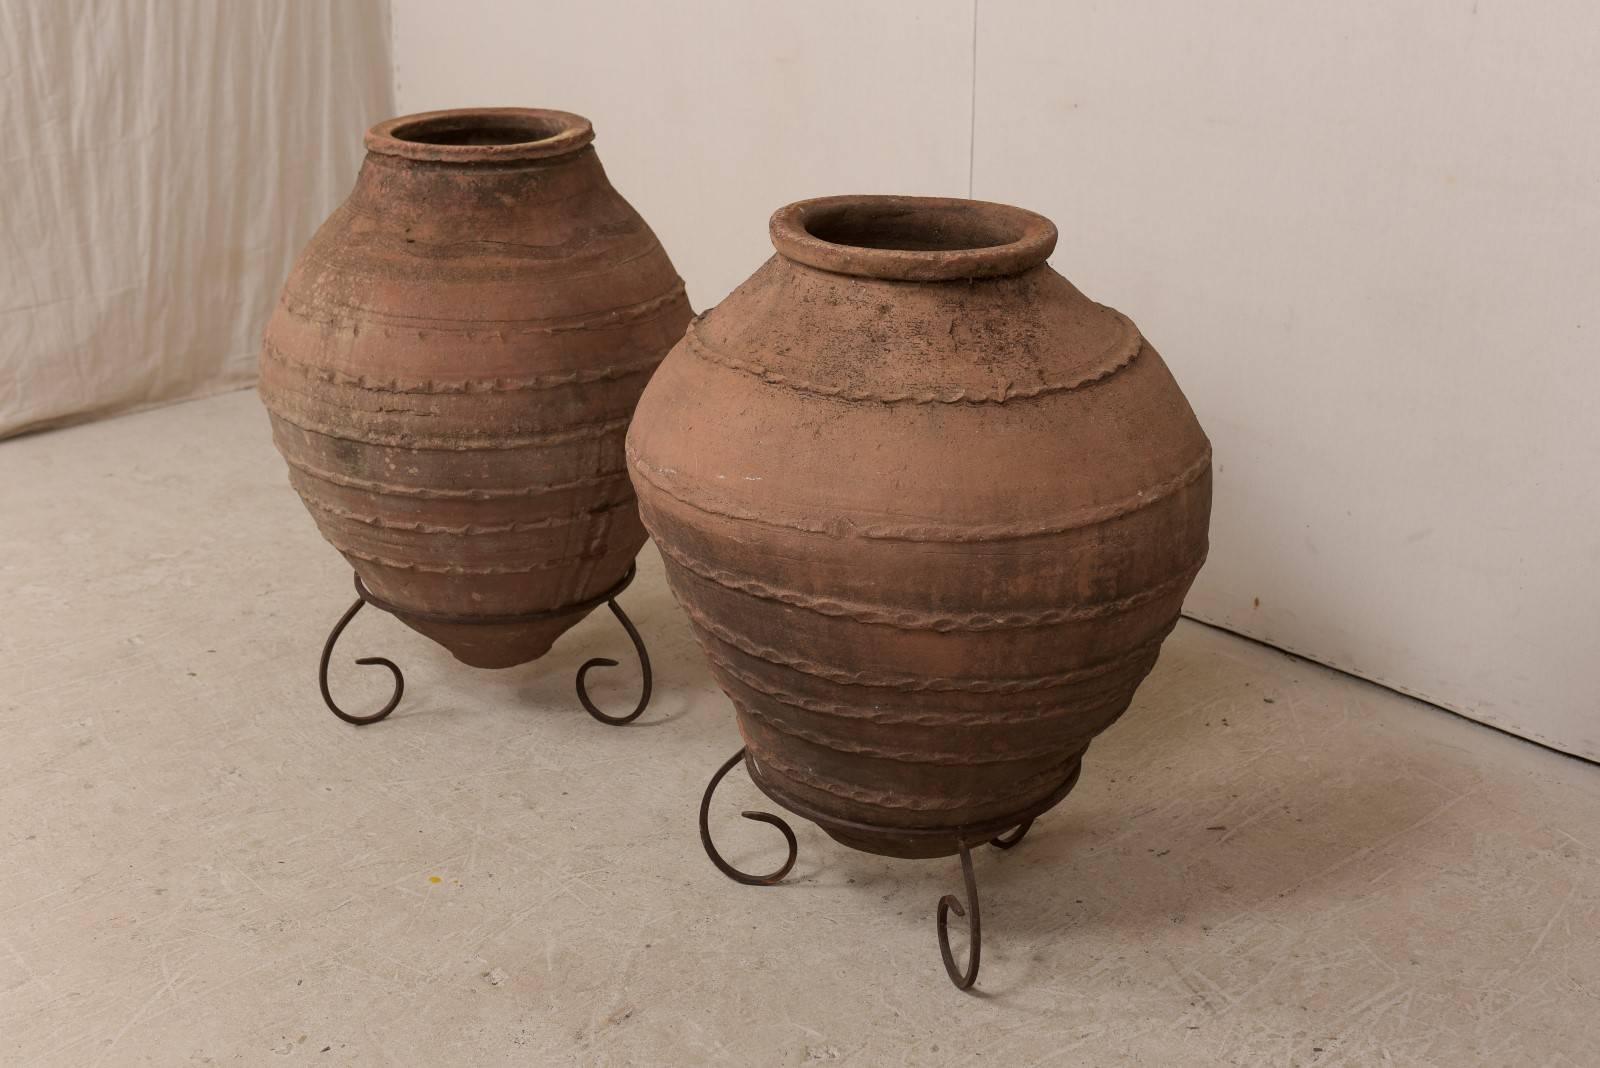 Patinated Pair of Antique Turkish Olive Jars Made of Terracotta on Scrolled Metal Stands